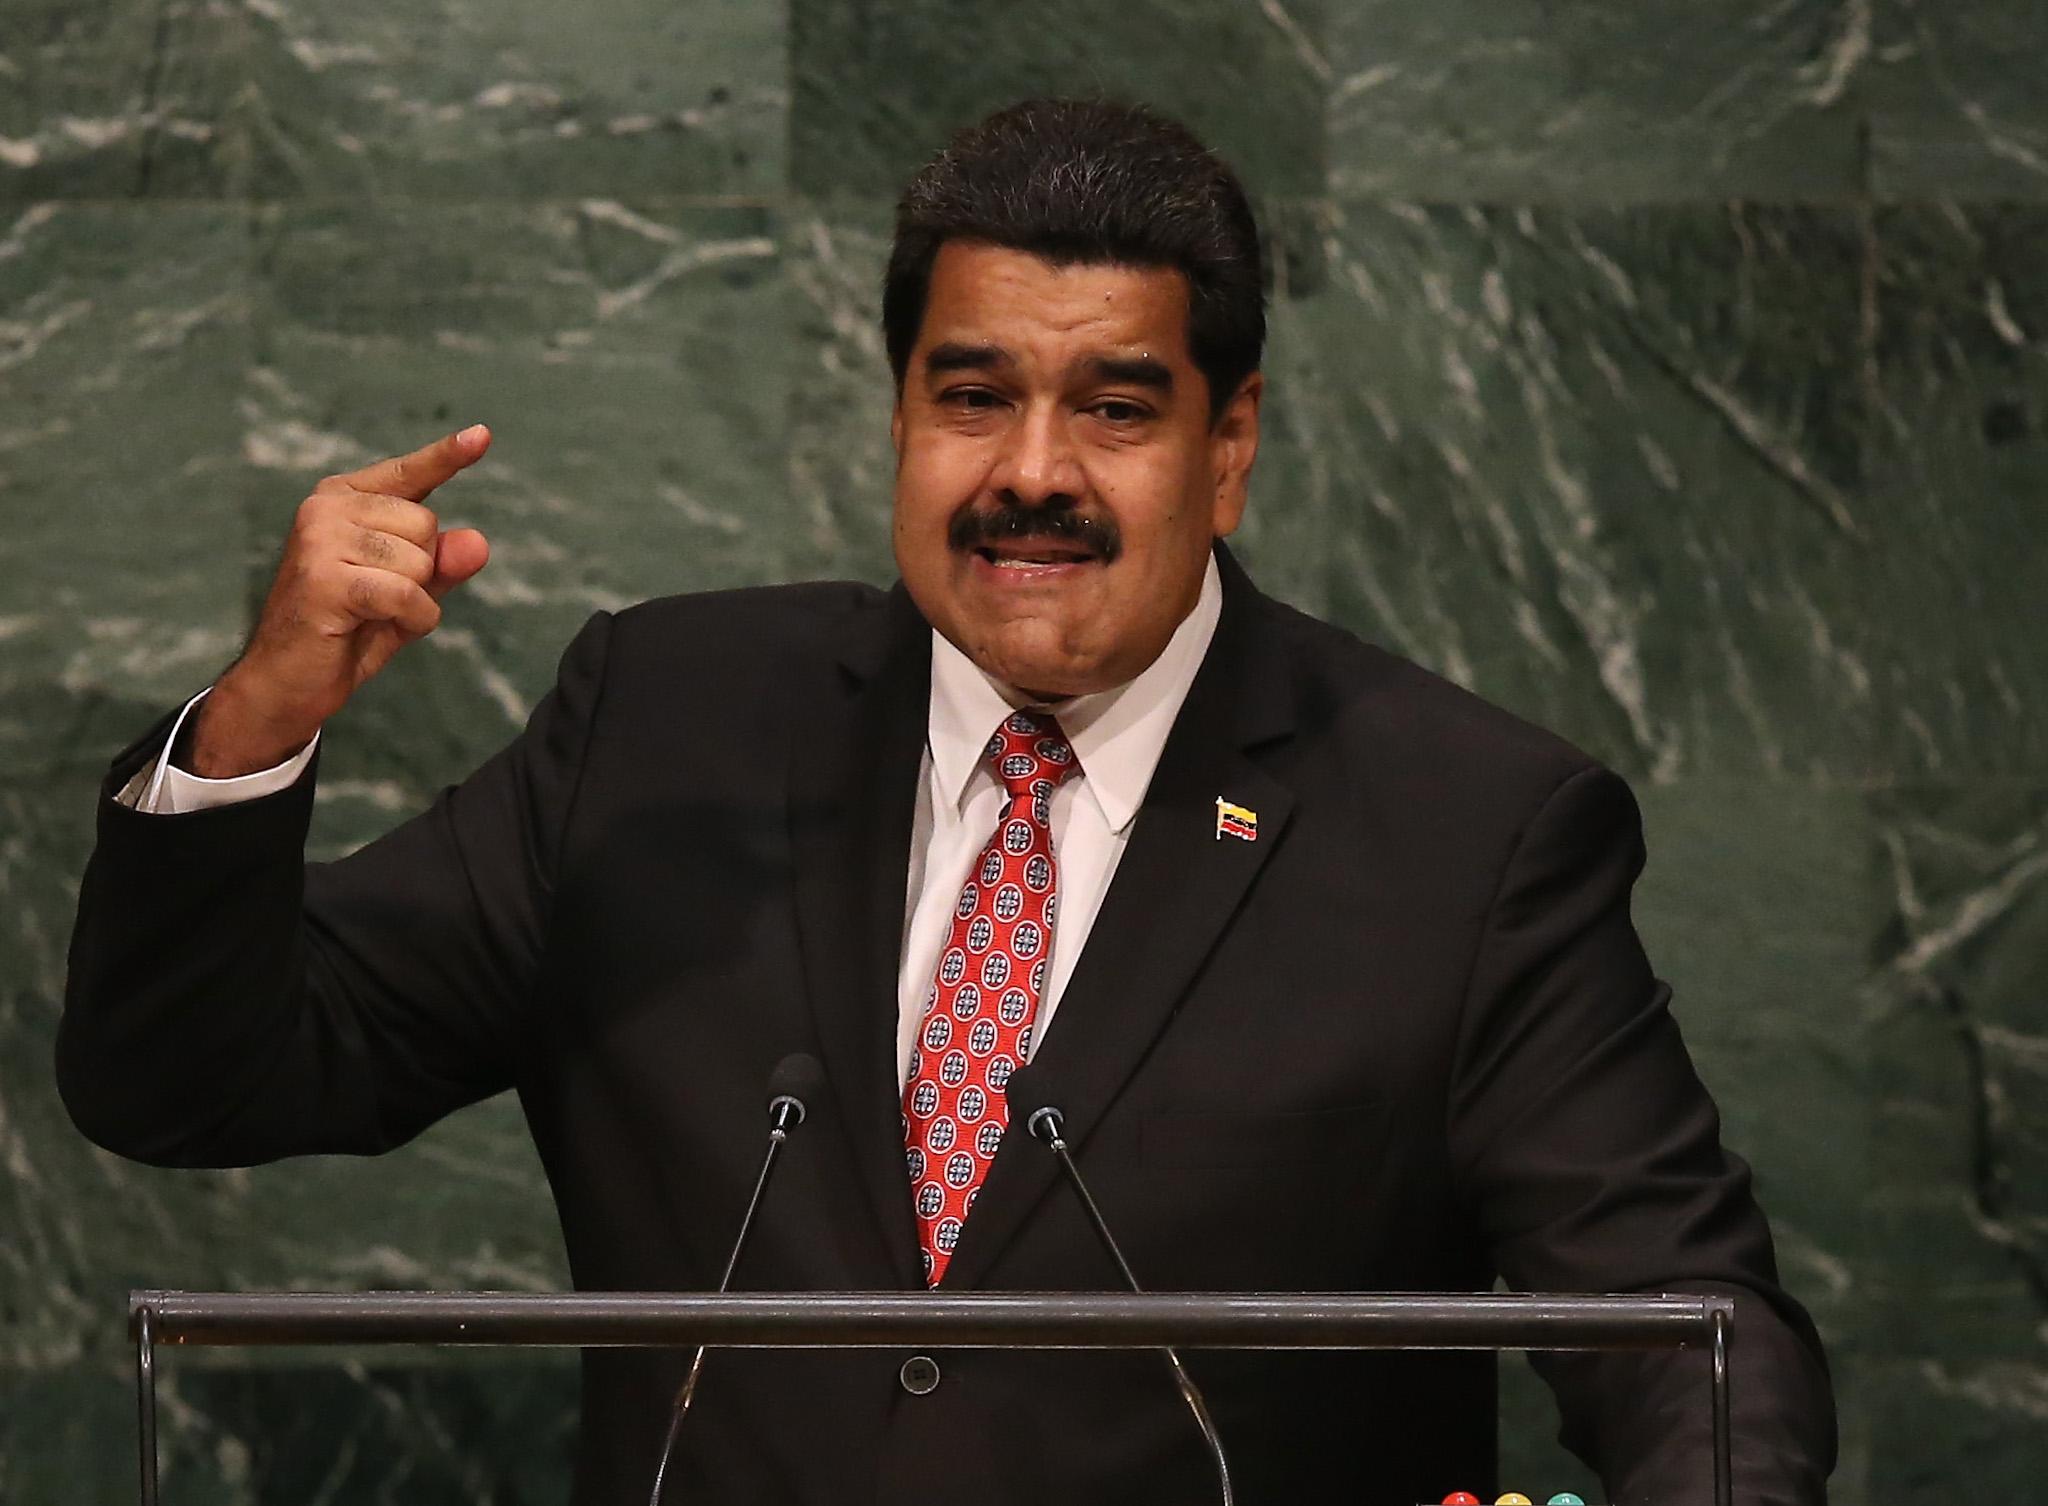 The sanctions come following a crackdown on opponents by President Maduro